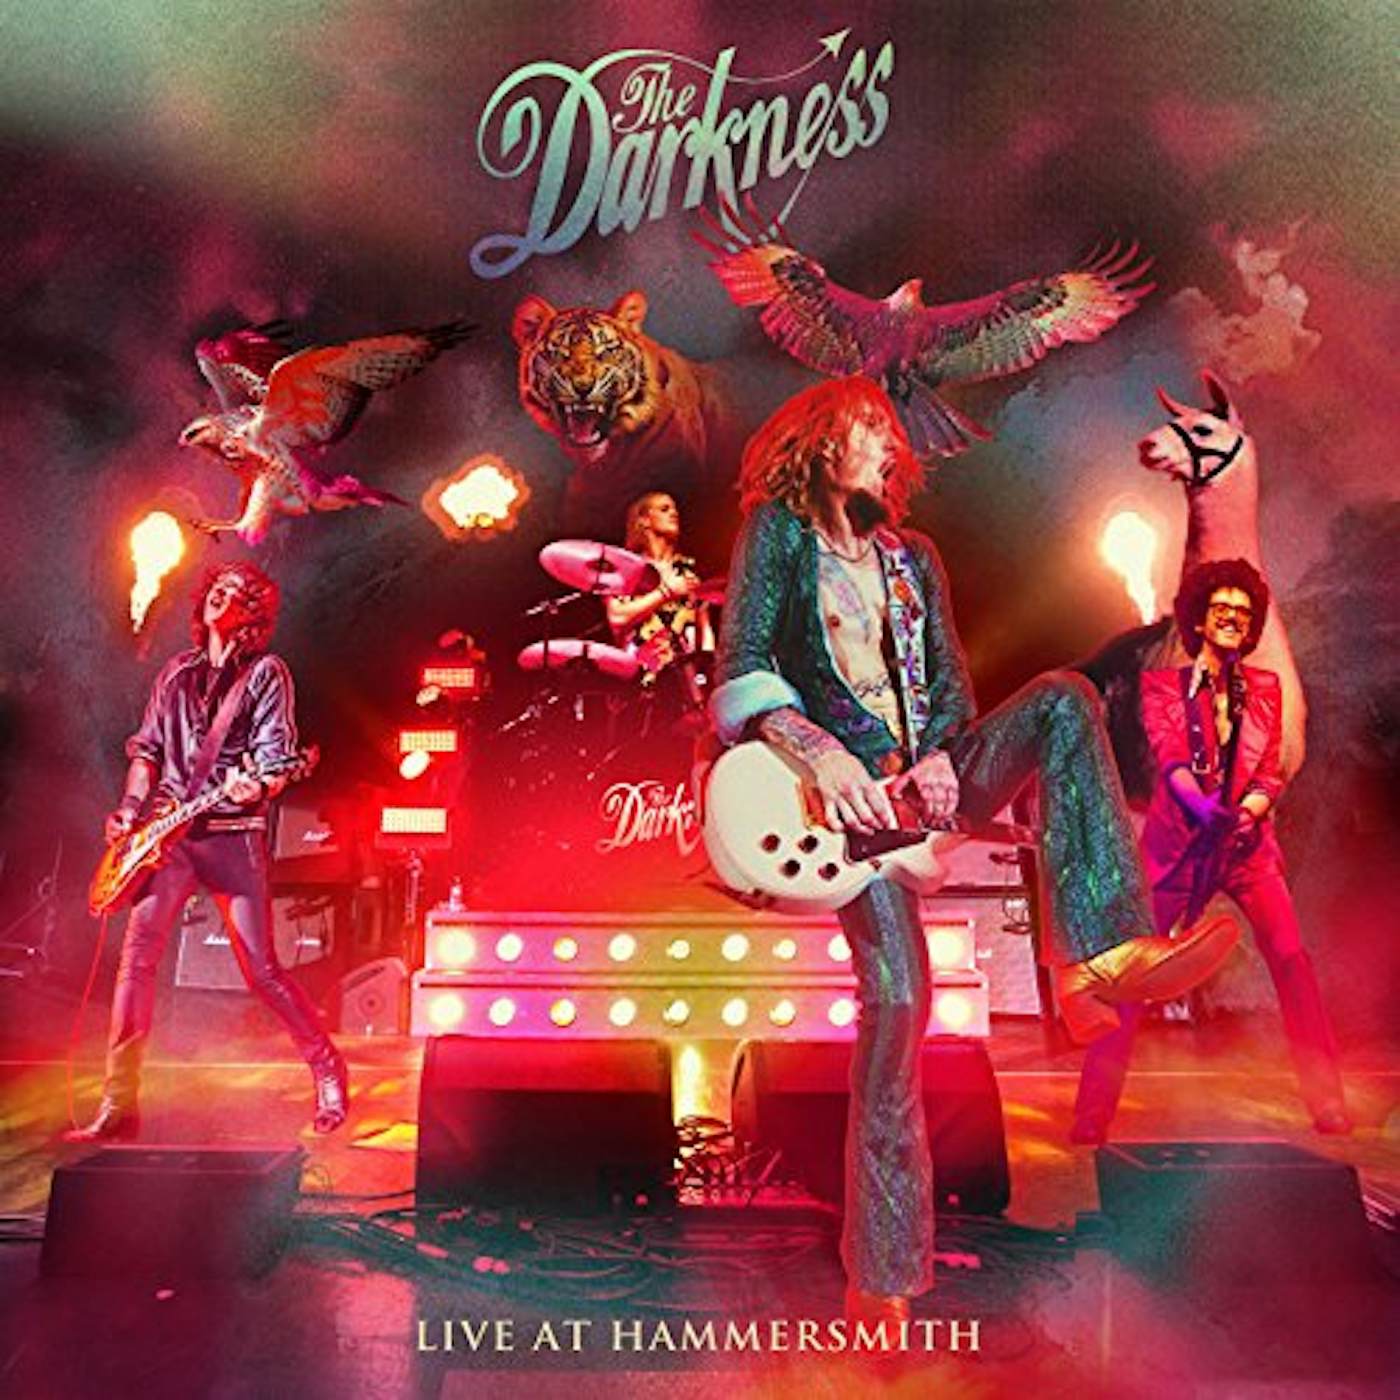 The Darkness LIVE AT HAMMERSMITH CD